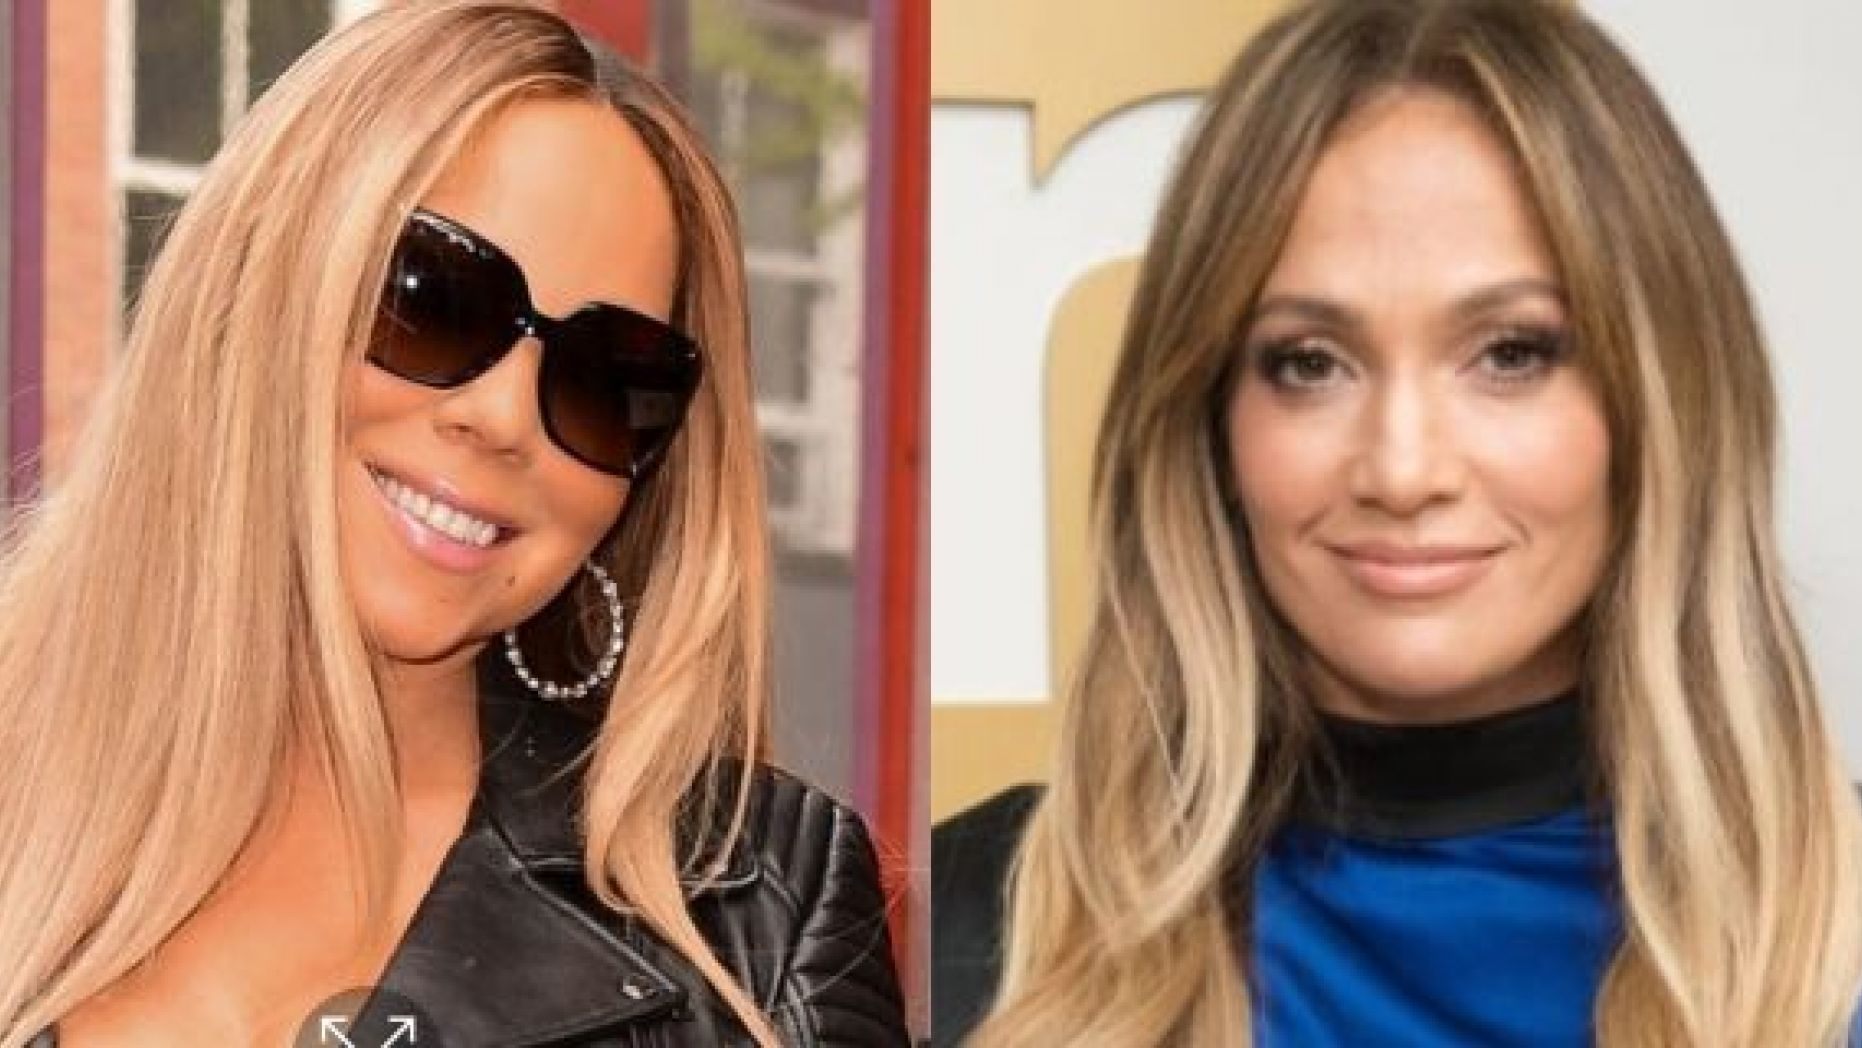 Mariah Carey and Jennifer Lopez are ready to bury their alleged hatchet once and for all.